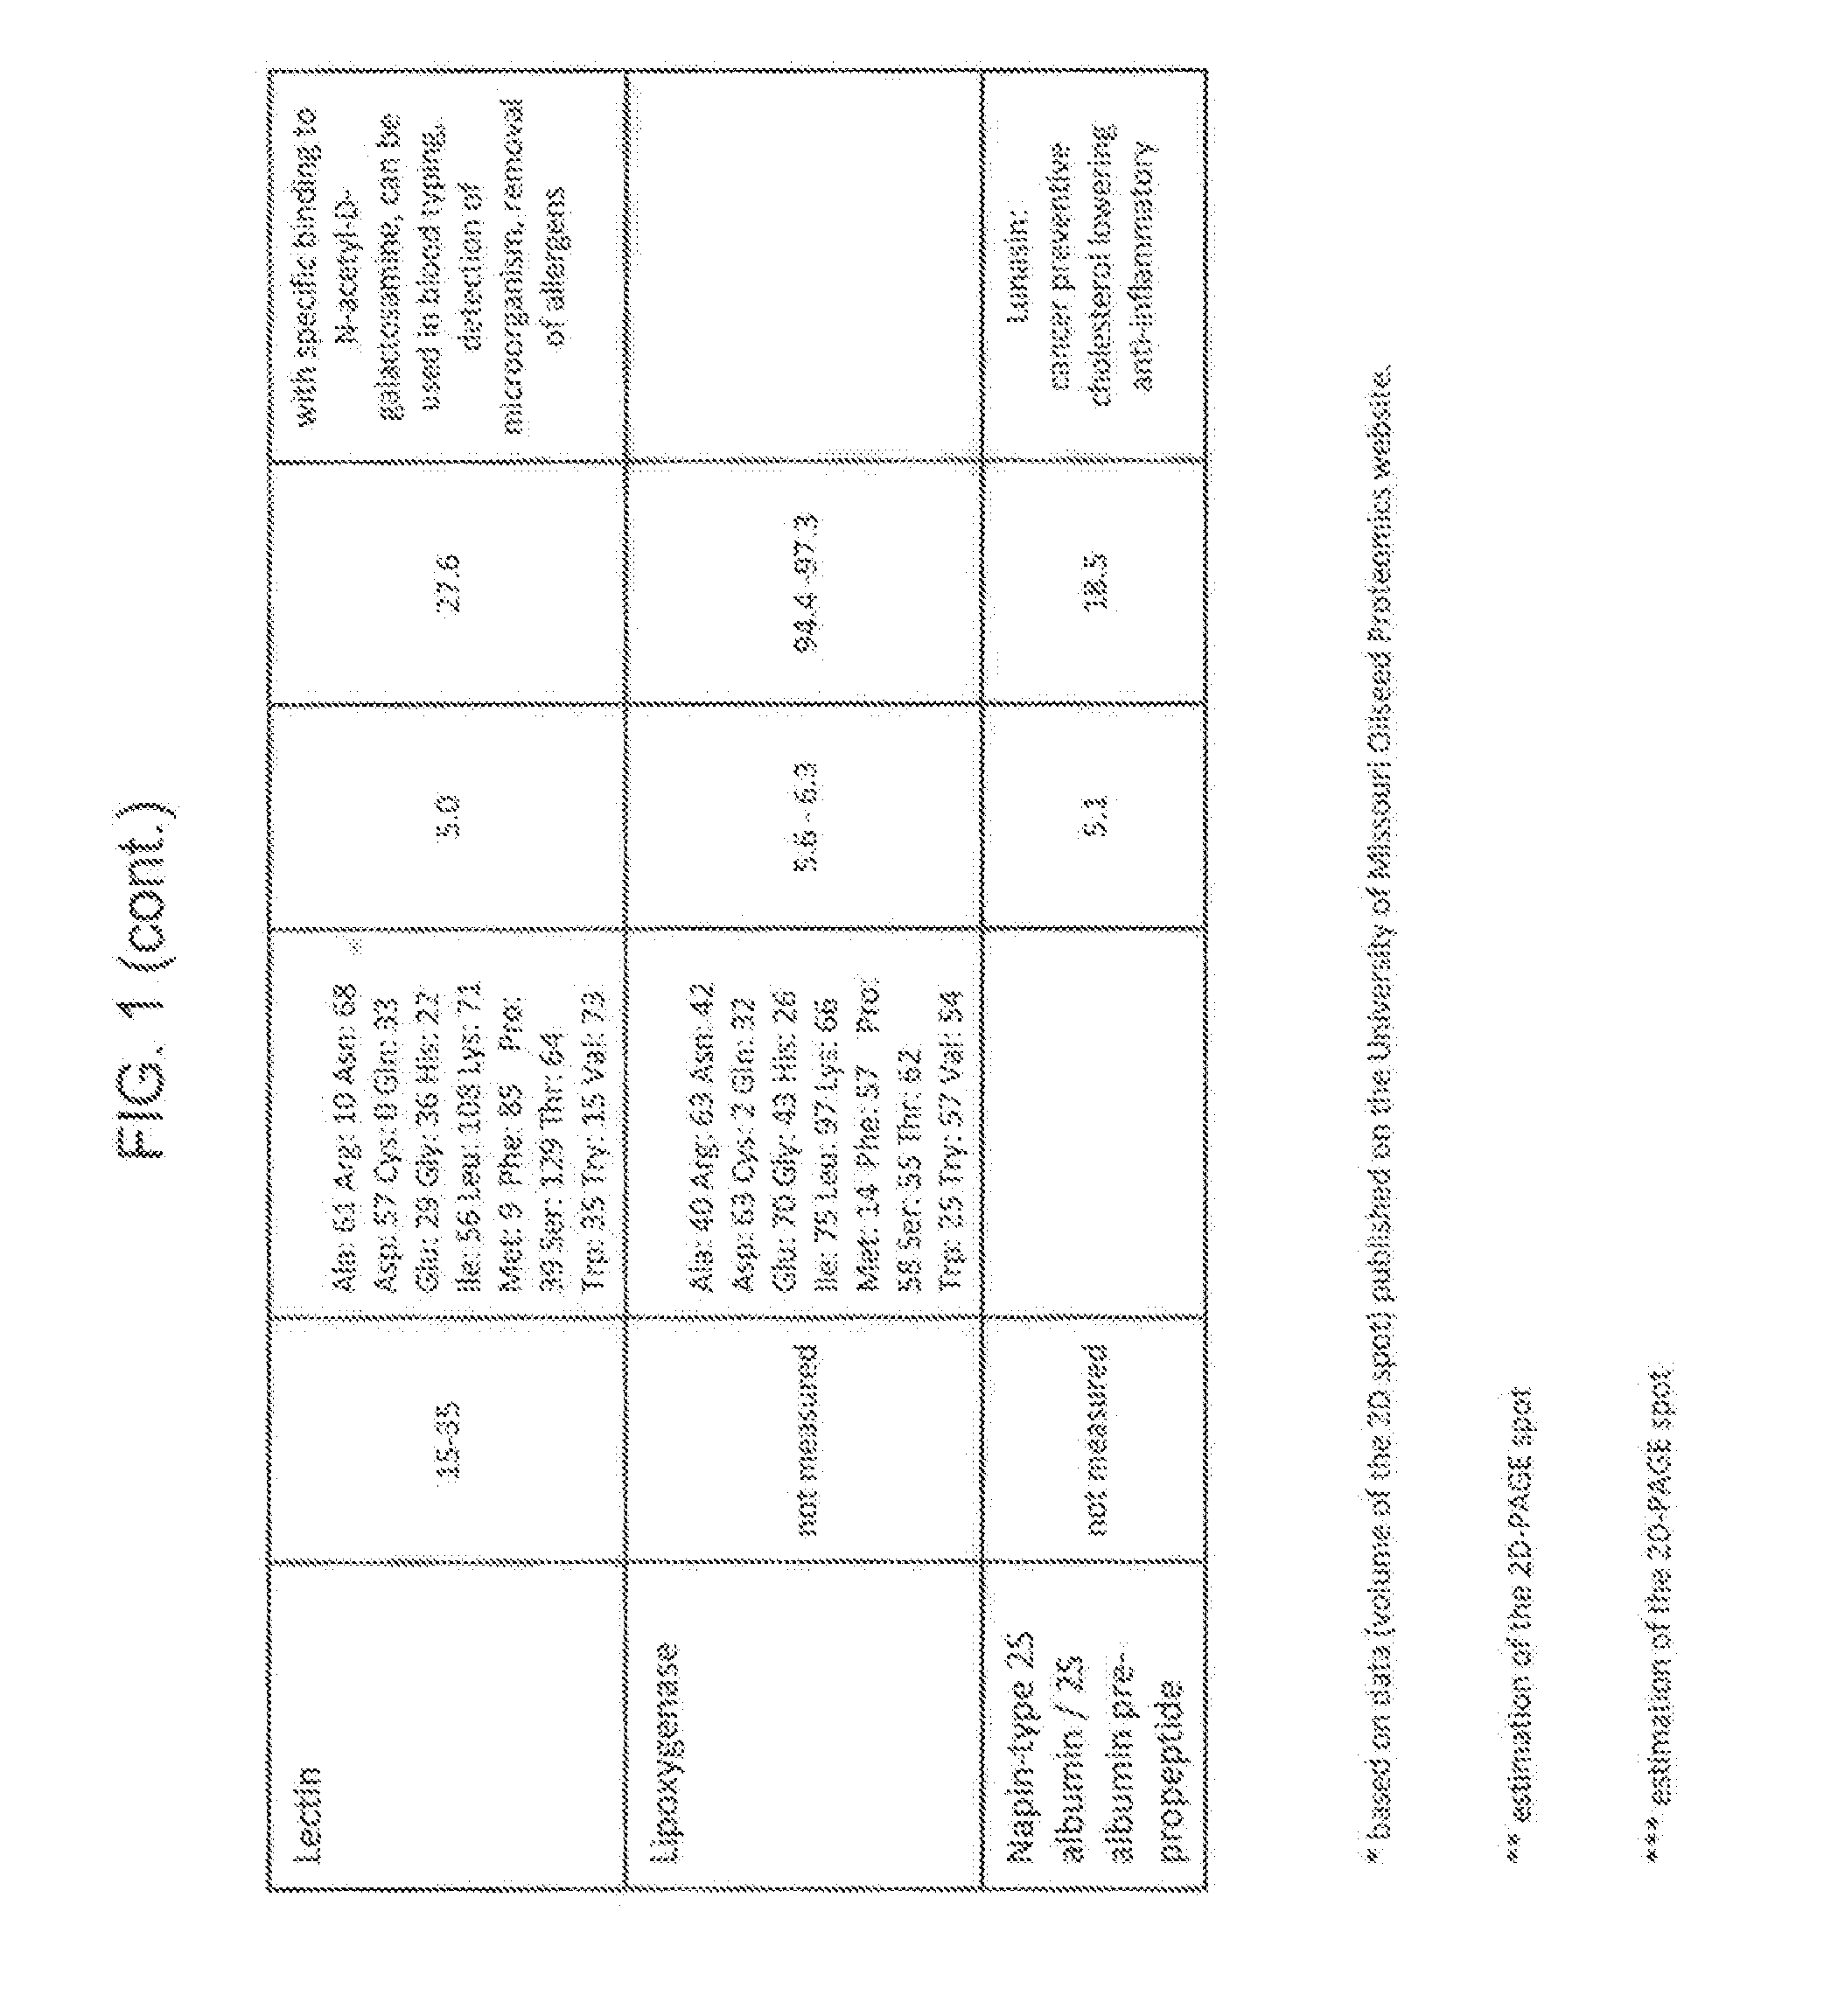 Baked food compositions comprising soy whey proteins that have been isolated from processing streams